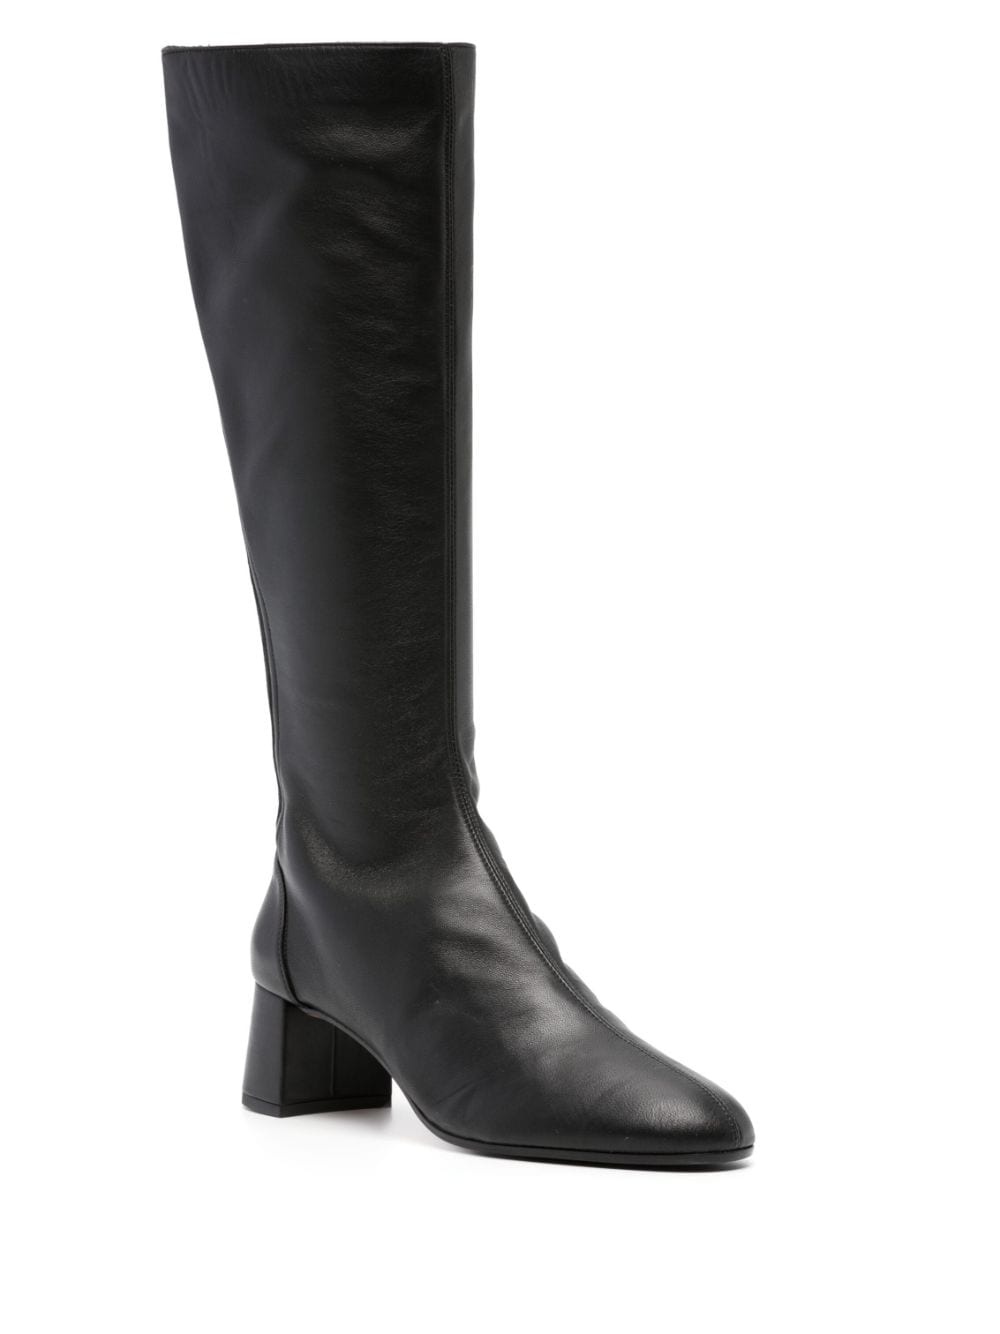 Saint Honore 50 leather knee-high boots - 2